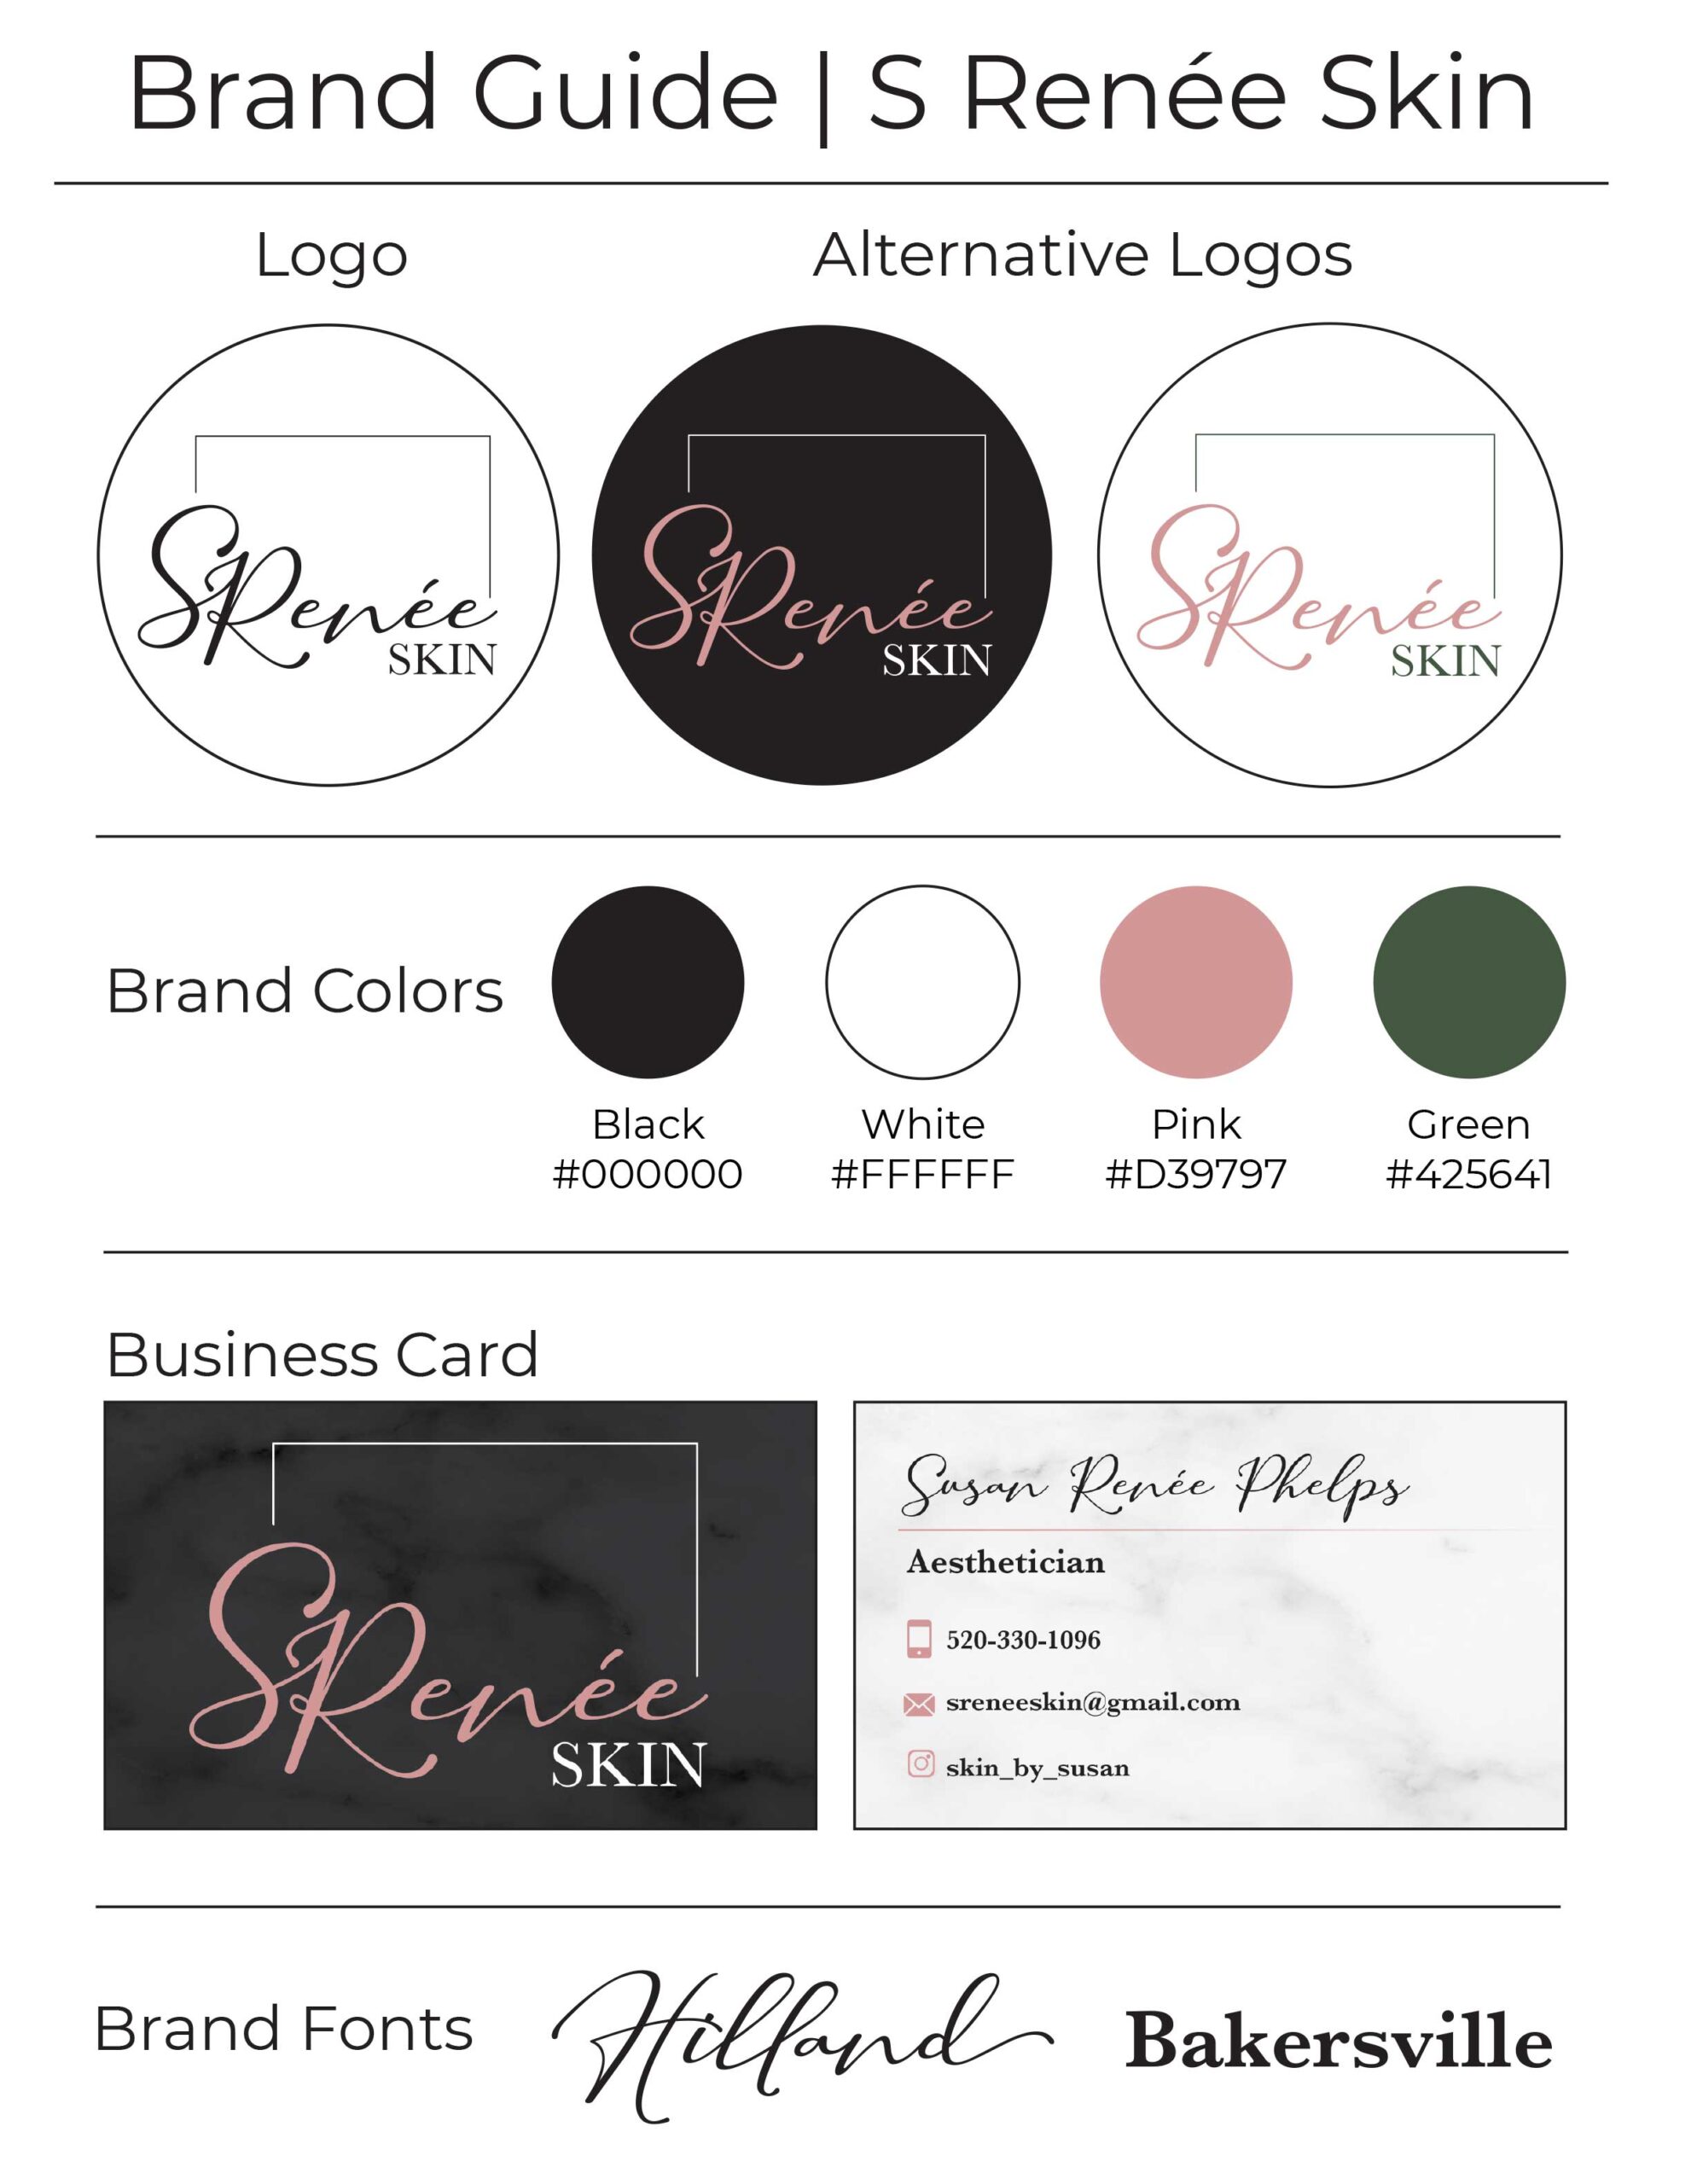 Susan Brand Board - Brand and Web Design Agency